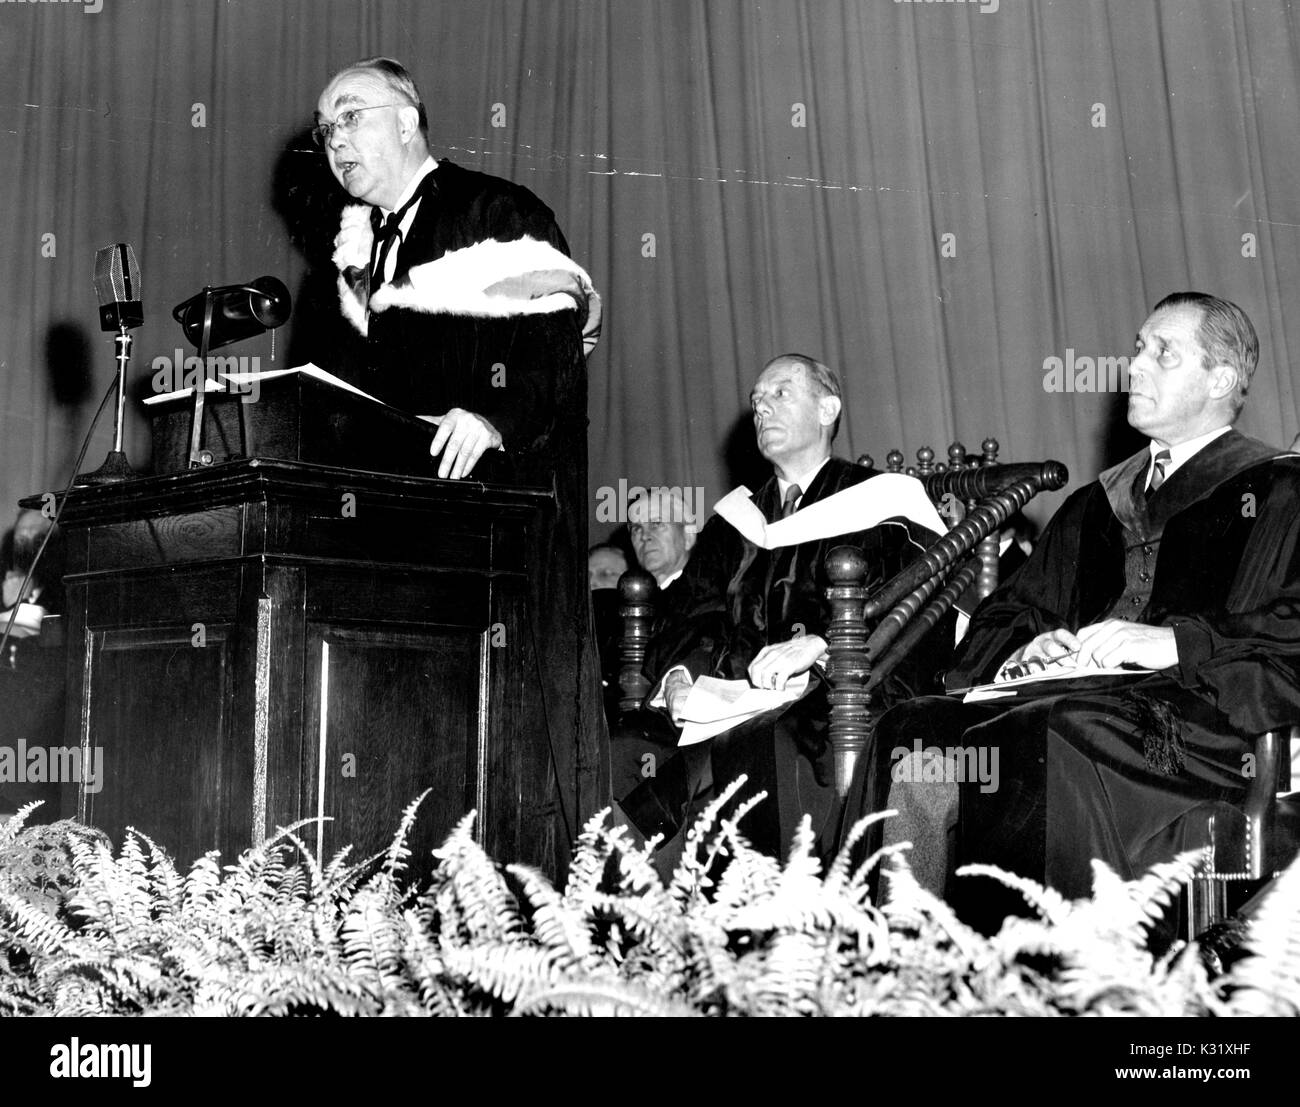 Commemoration Day 1951 at Johns Hopkins University, with humanities scholar Henry Allen Moe standing at the podium to the left giving a speech to graduating students, while biophysist Detlev Wulf Bronk and chaplain Thomas Guthrie Speers seated behind him on the stage, all wearing graduation garb, Baltimore, Maryland, February 22, 1951. Stock Photo